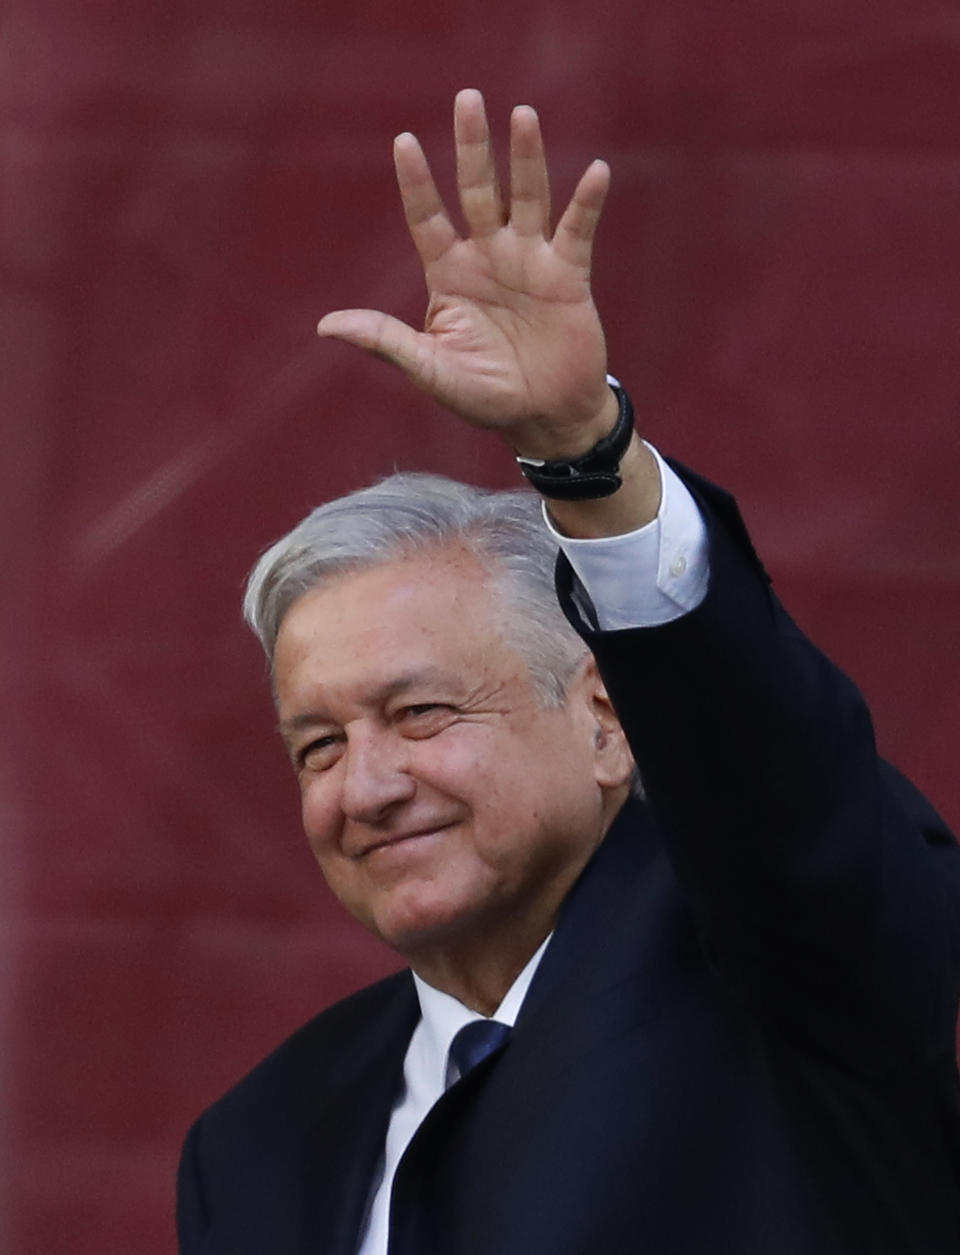 Mexico's President Andres Manuel Lopez Obrador greets the crowd at a rally to celebrate the one-year anniversary of his election, in Mexico City's main square, the Zocalo, Monday, July 1, 2019. (AP Photo/Marco Ugarte)